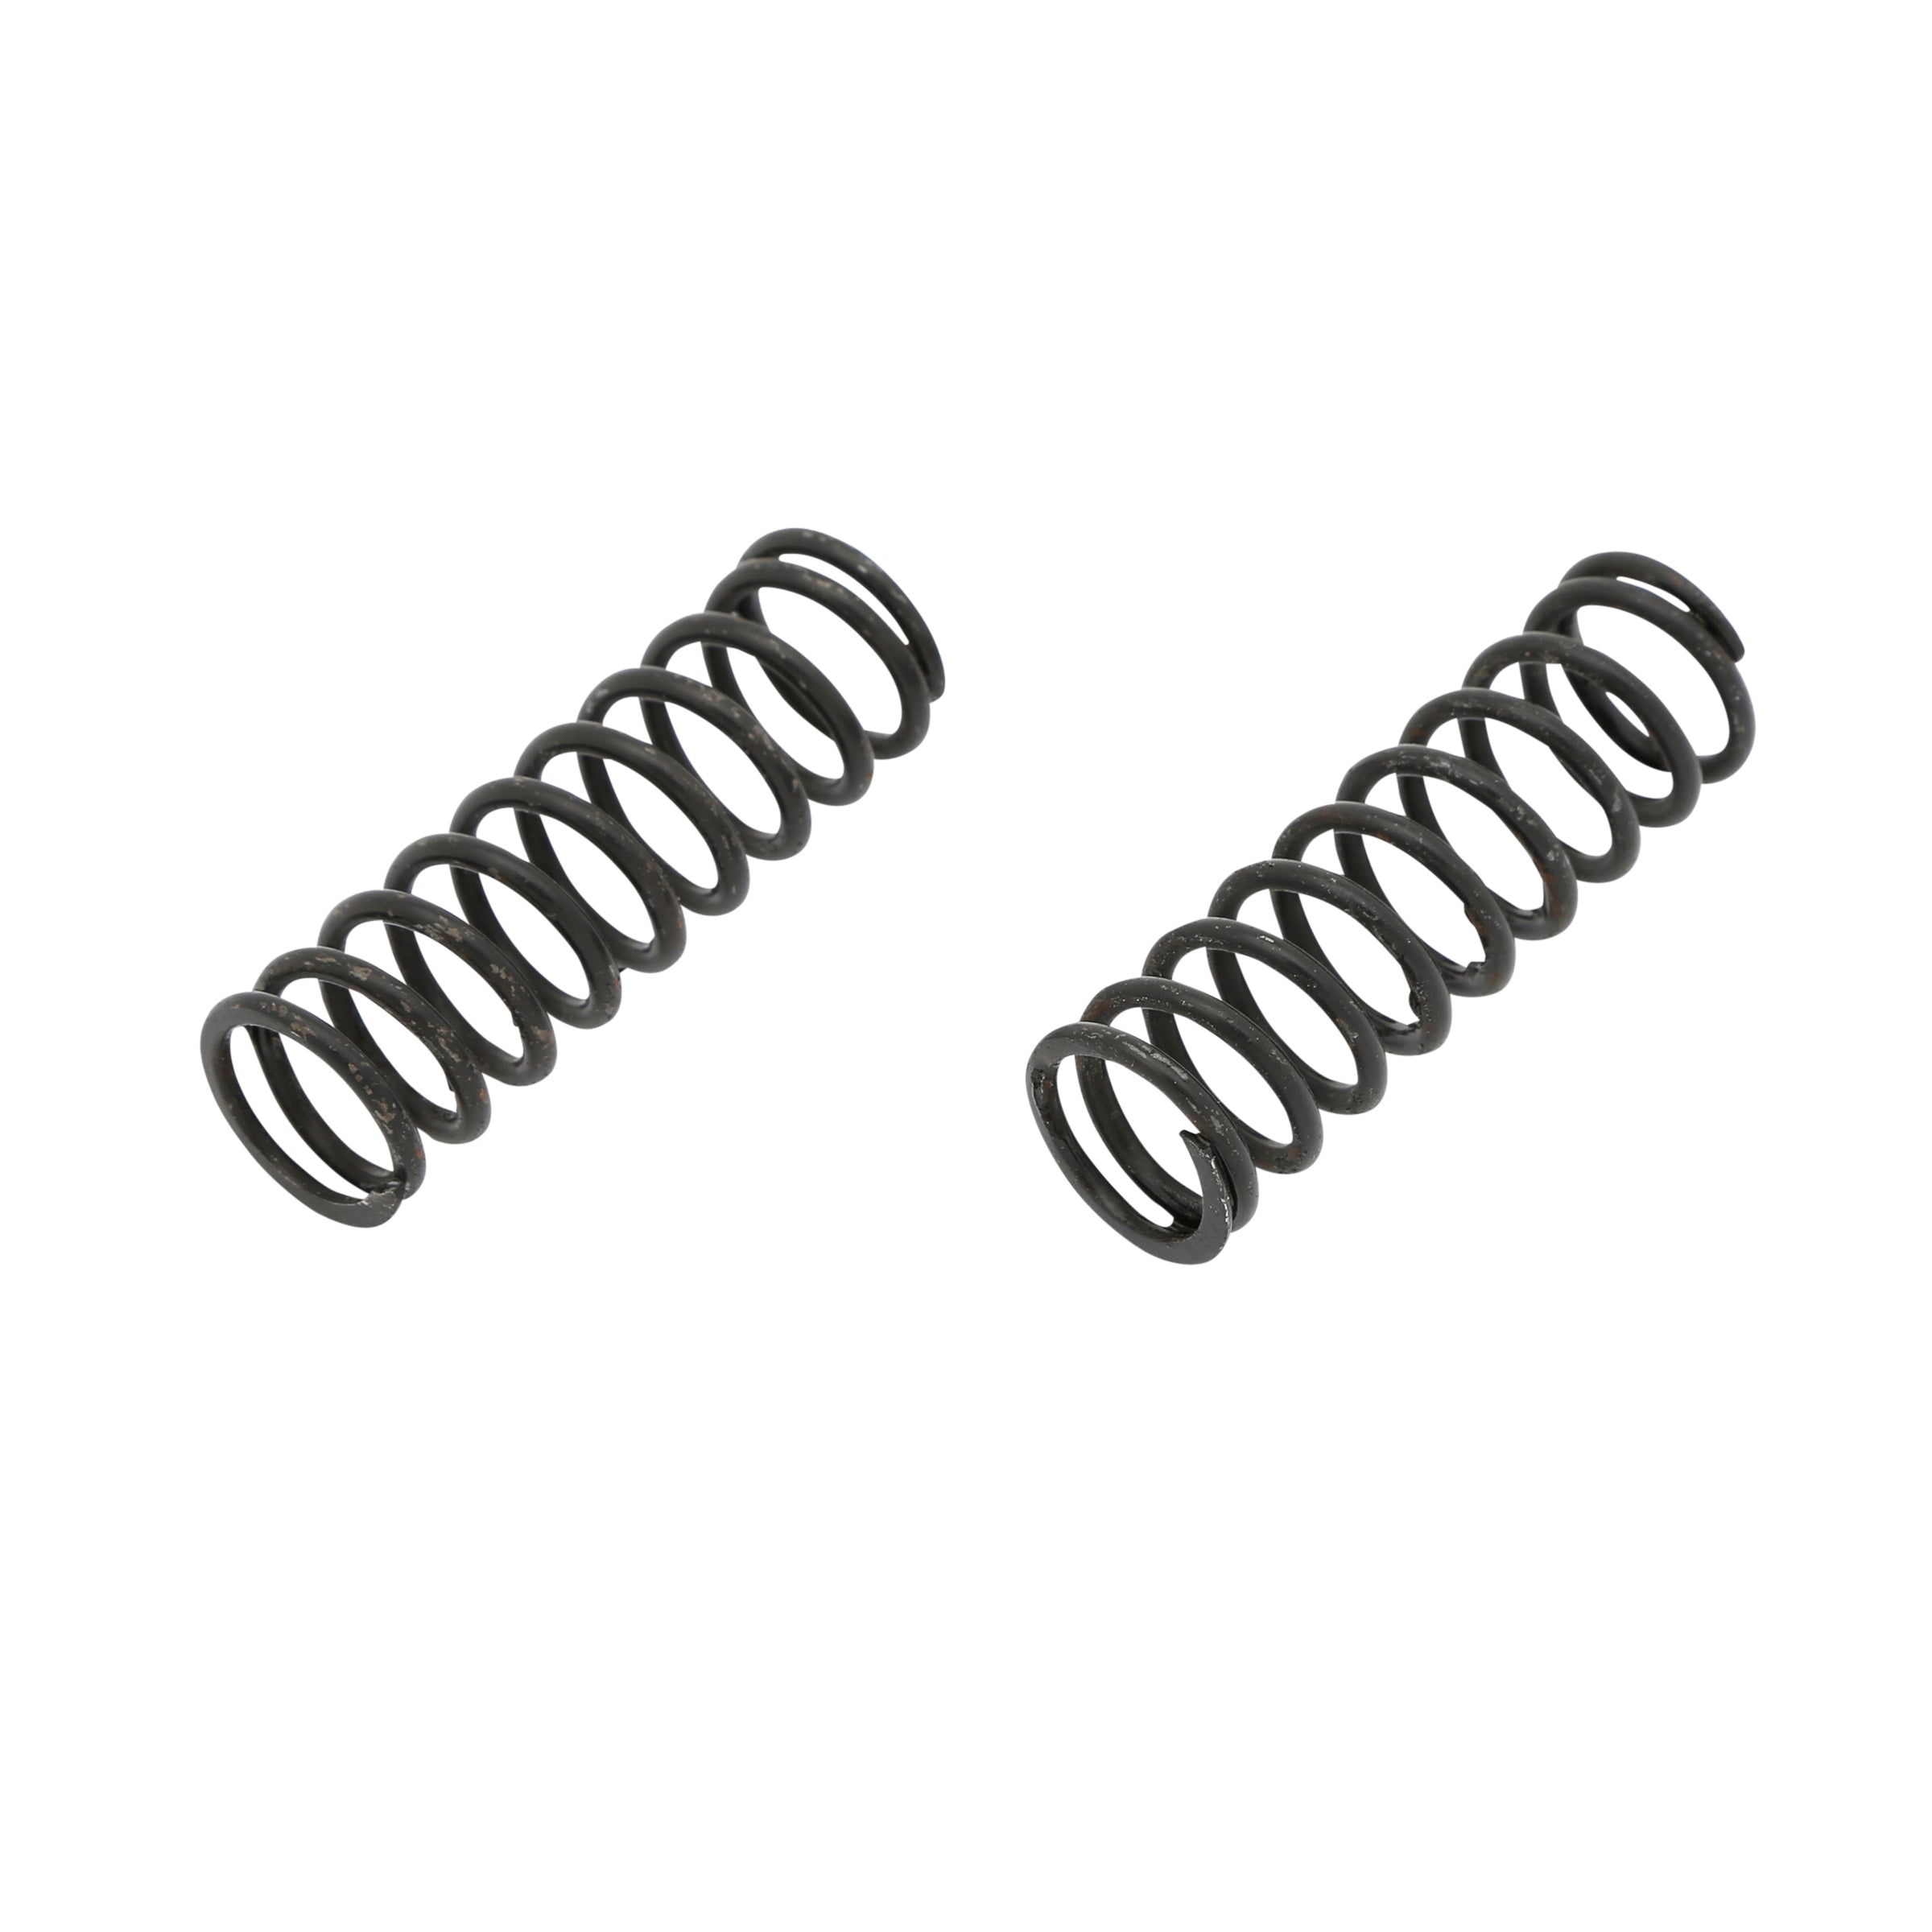 Control Rod Springs • 1928-31 Model A Ford